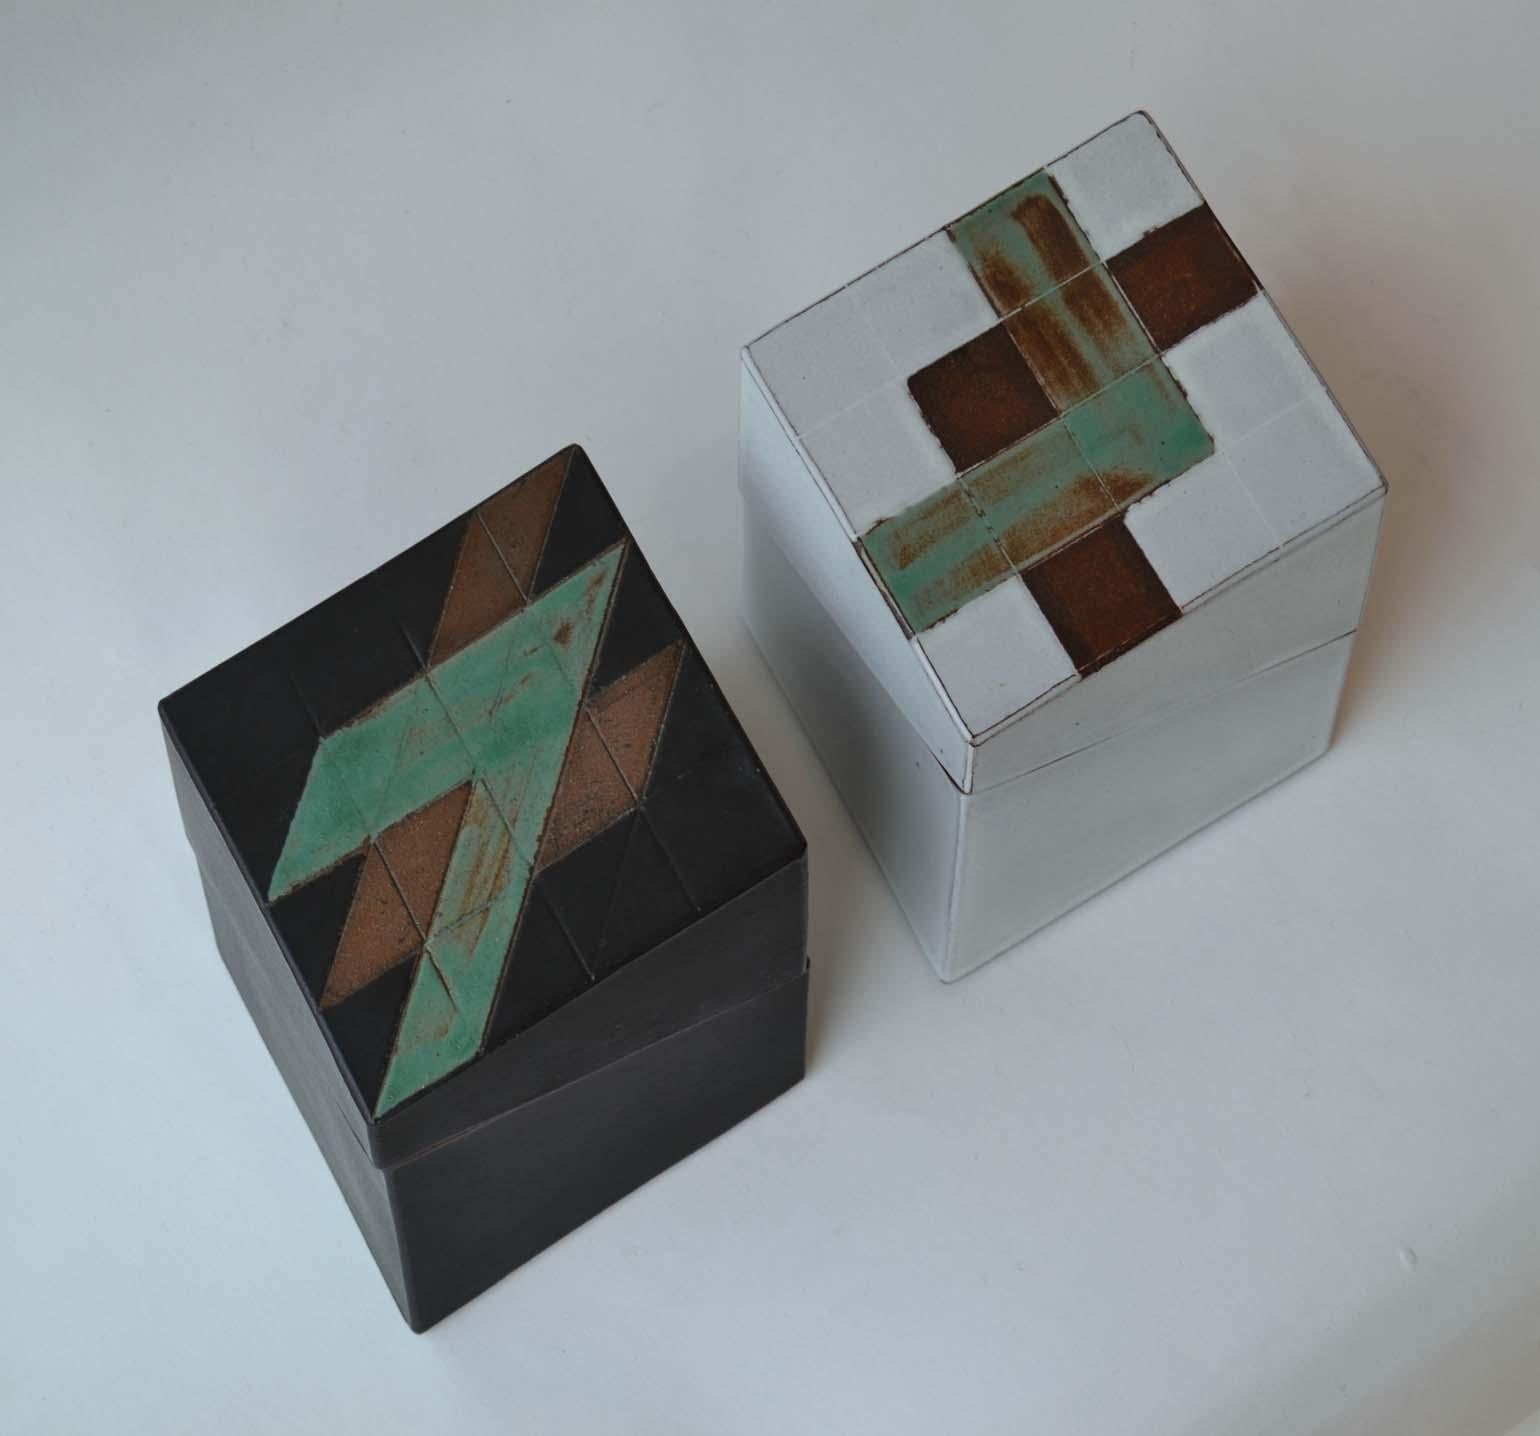 Pair of Square Geometric Ceramic Boxes in Black and White In Excellent Condition For Sale In London, GB